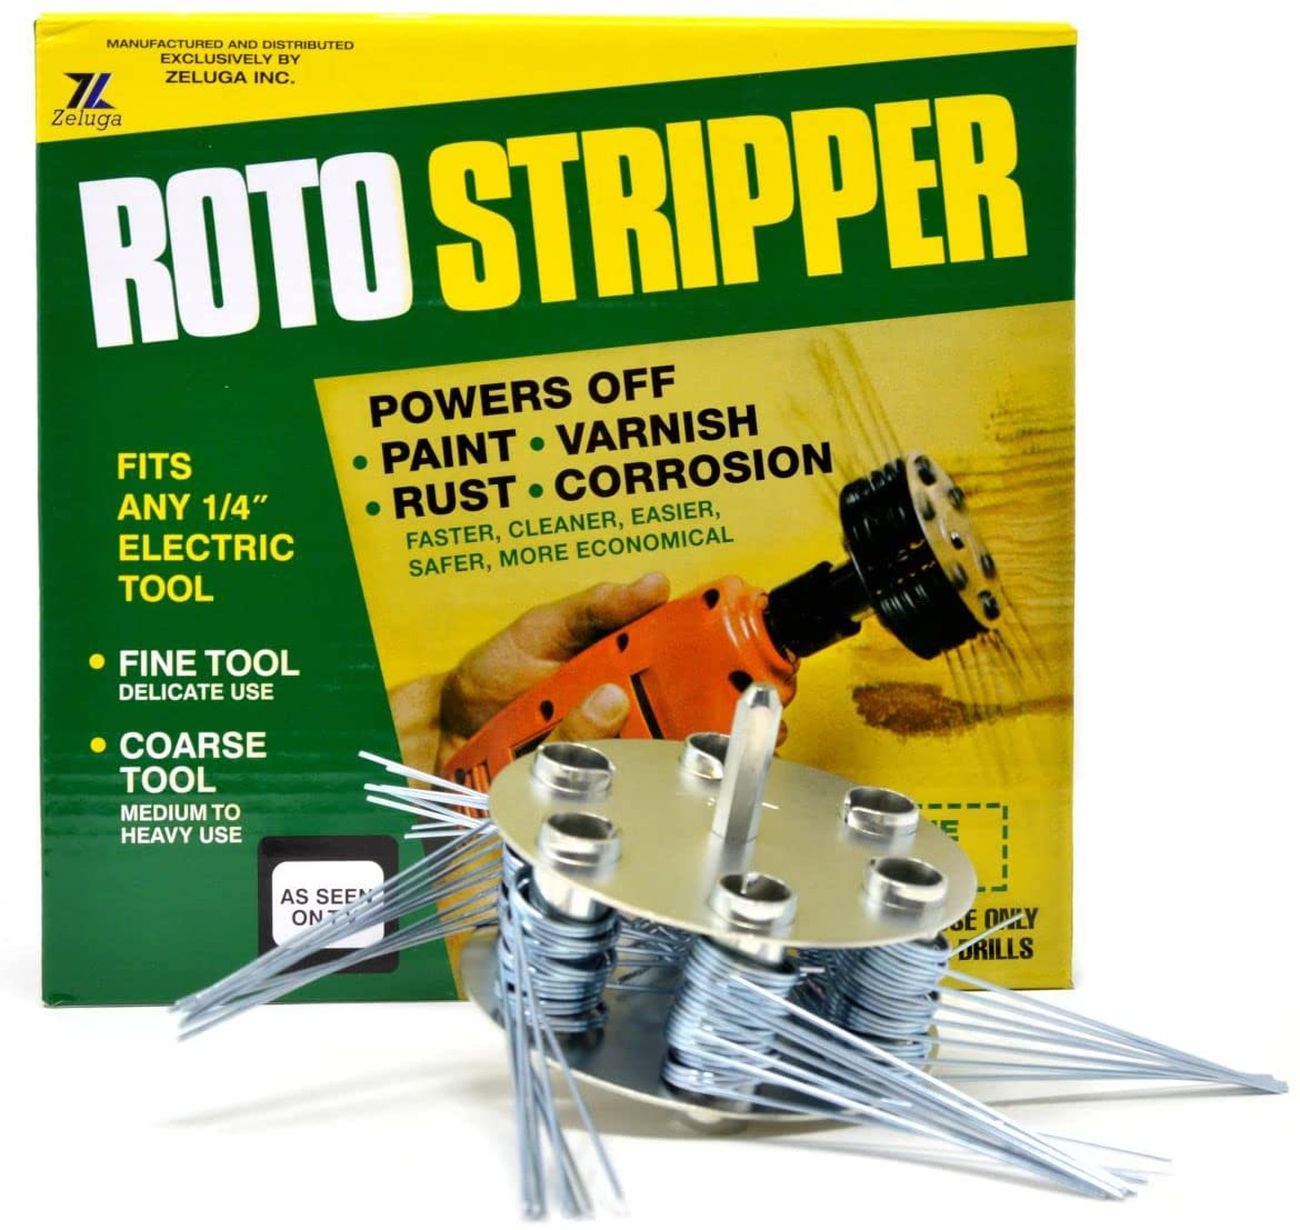 What’s the uses of Roto Stripper